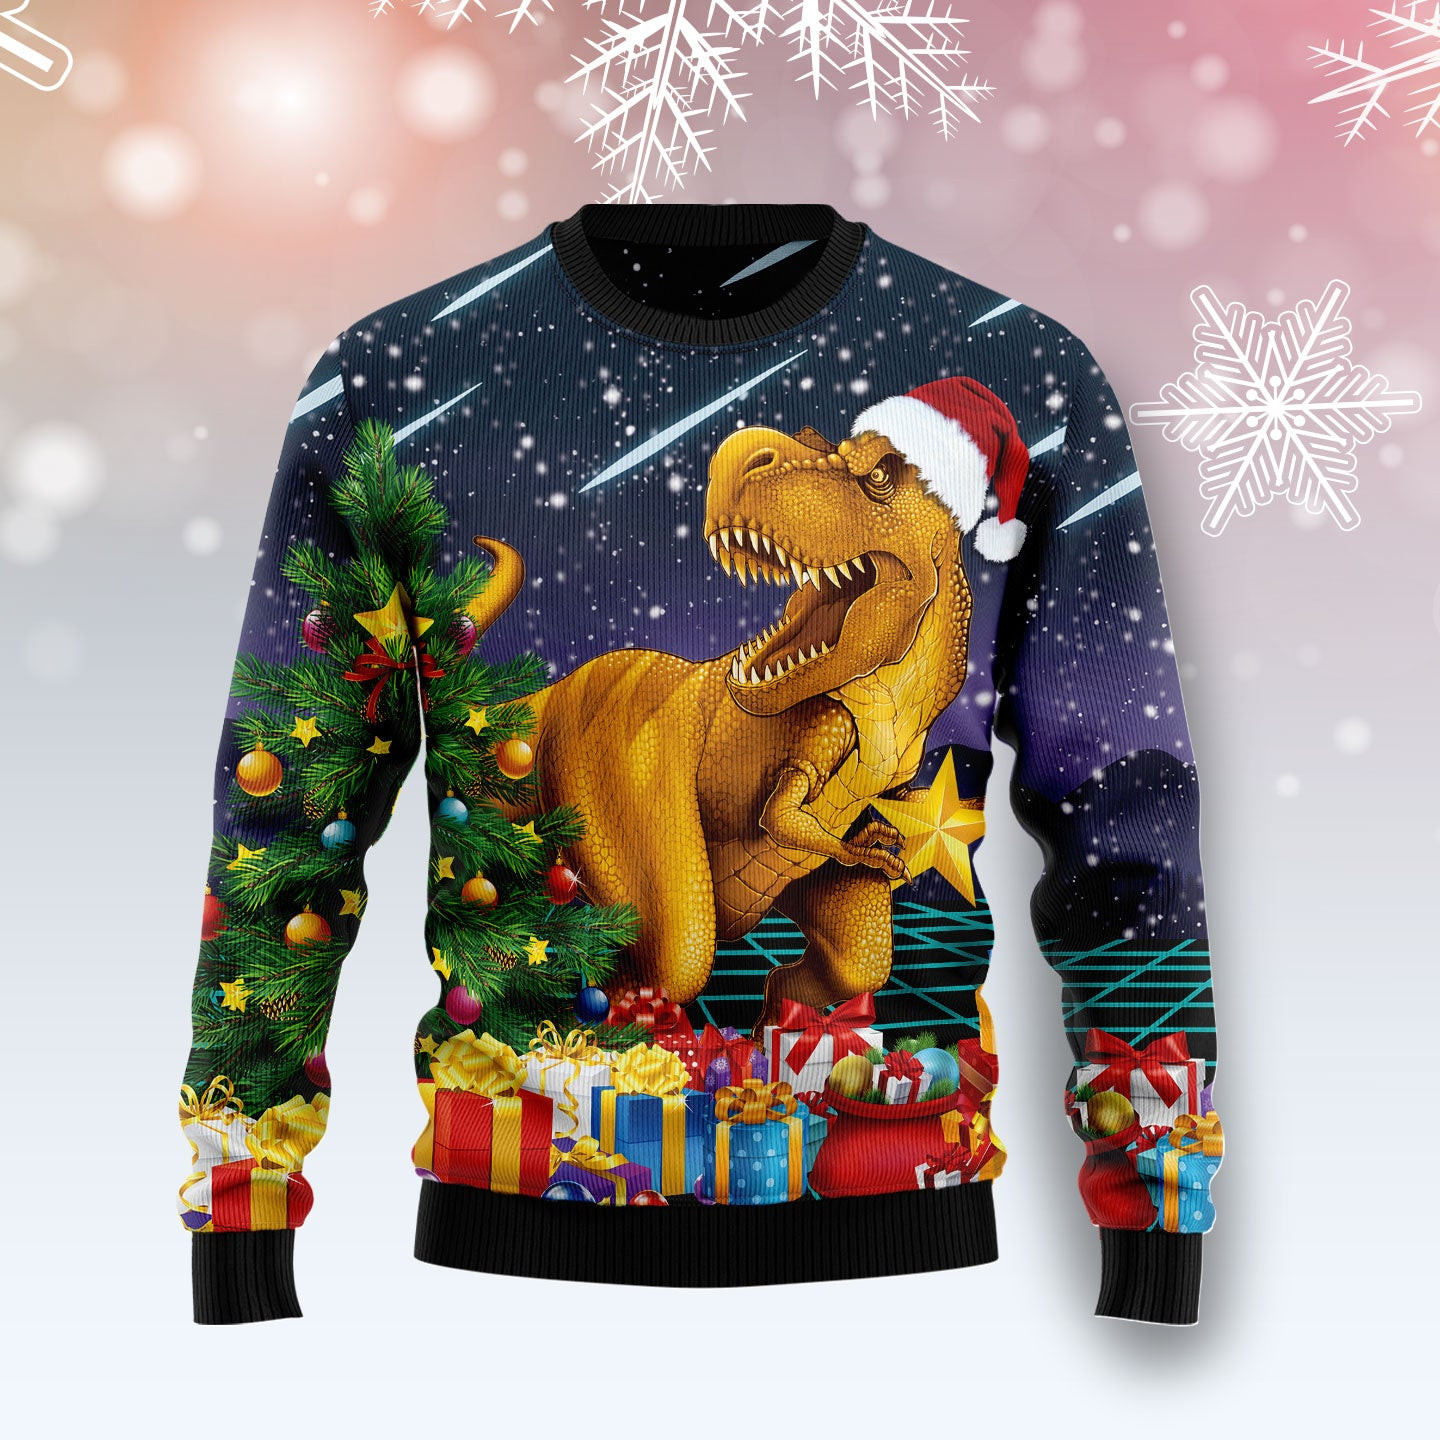 Merry T-Rex Christmas Ugly Christmas Sweater, Ugly Sweater For Men Women, Holiday Sweater